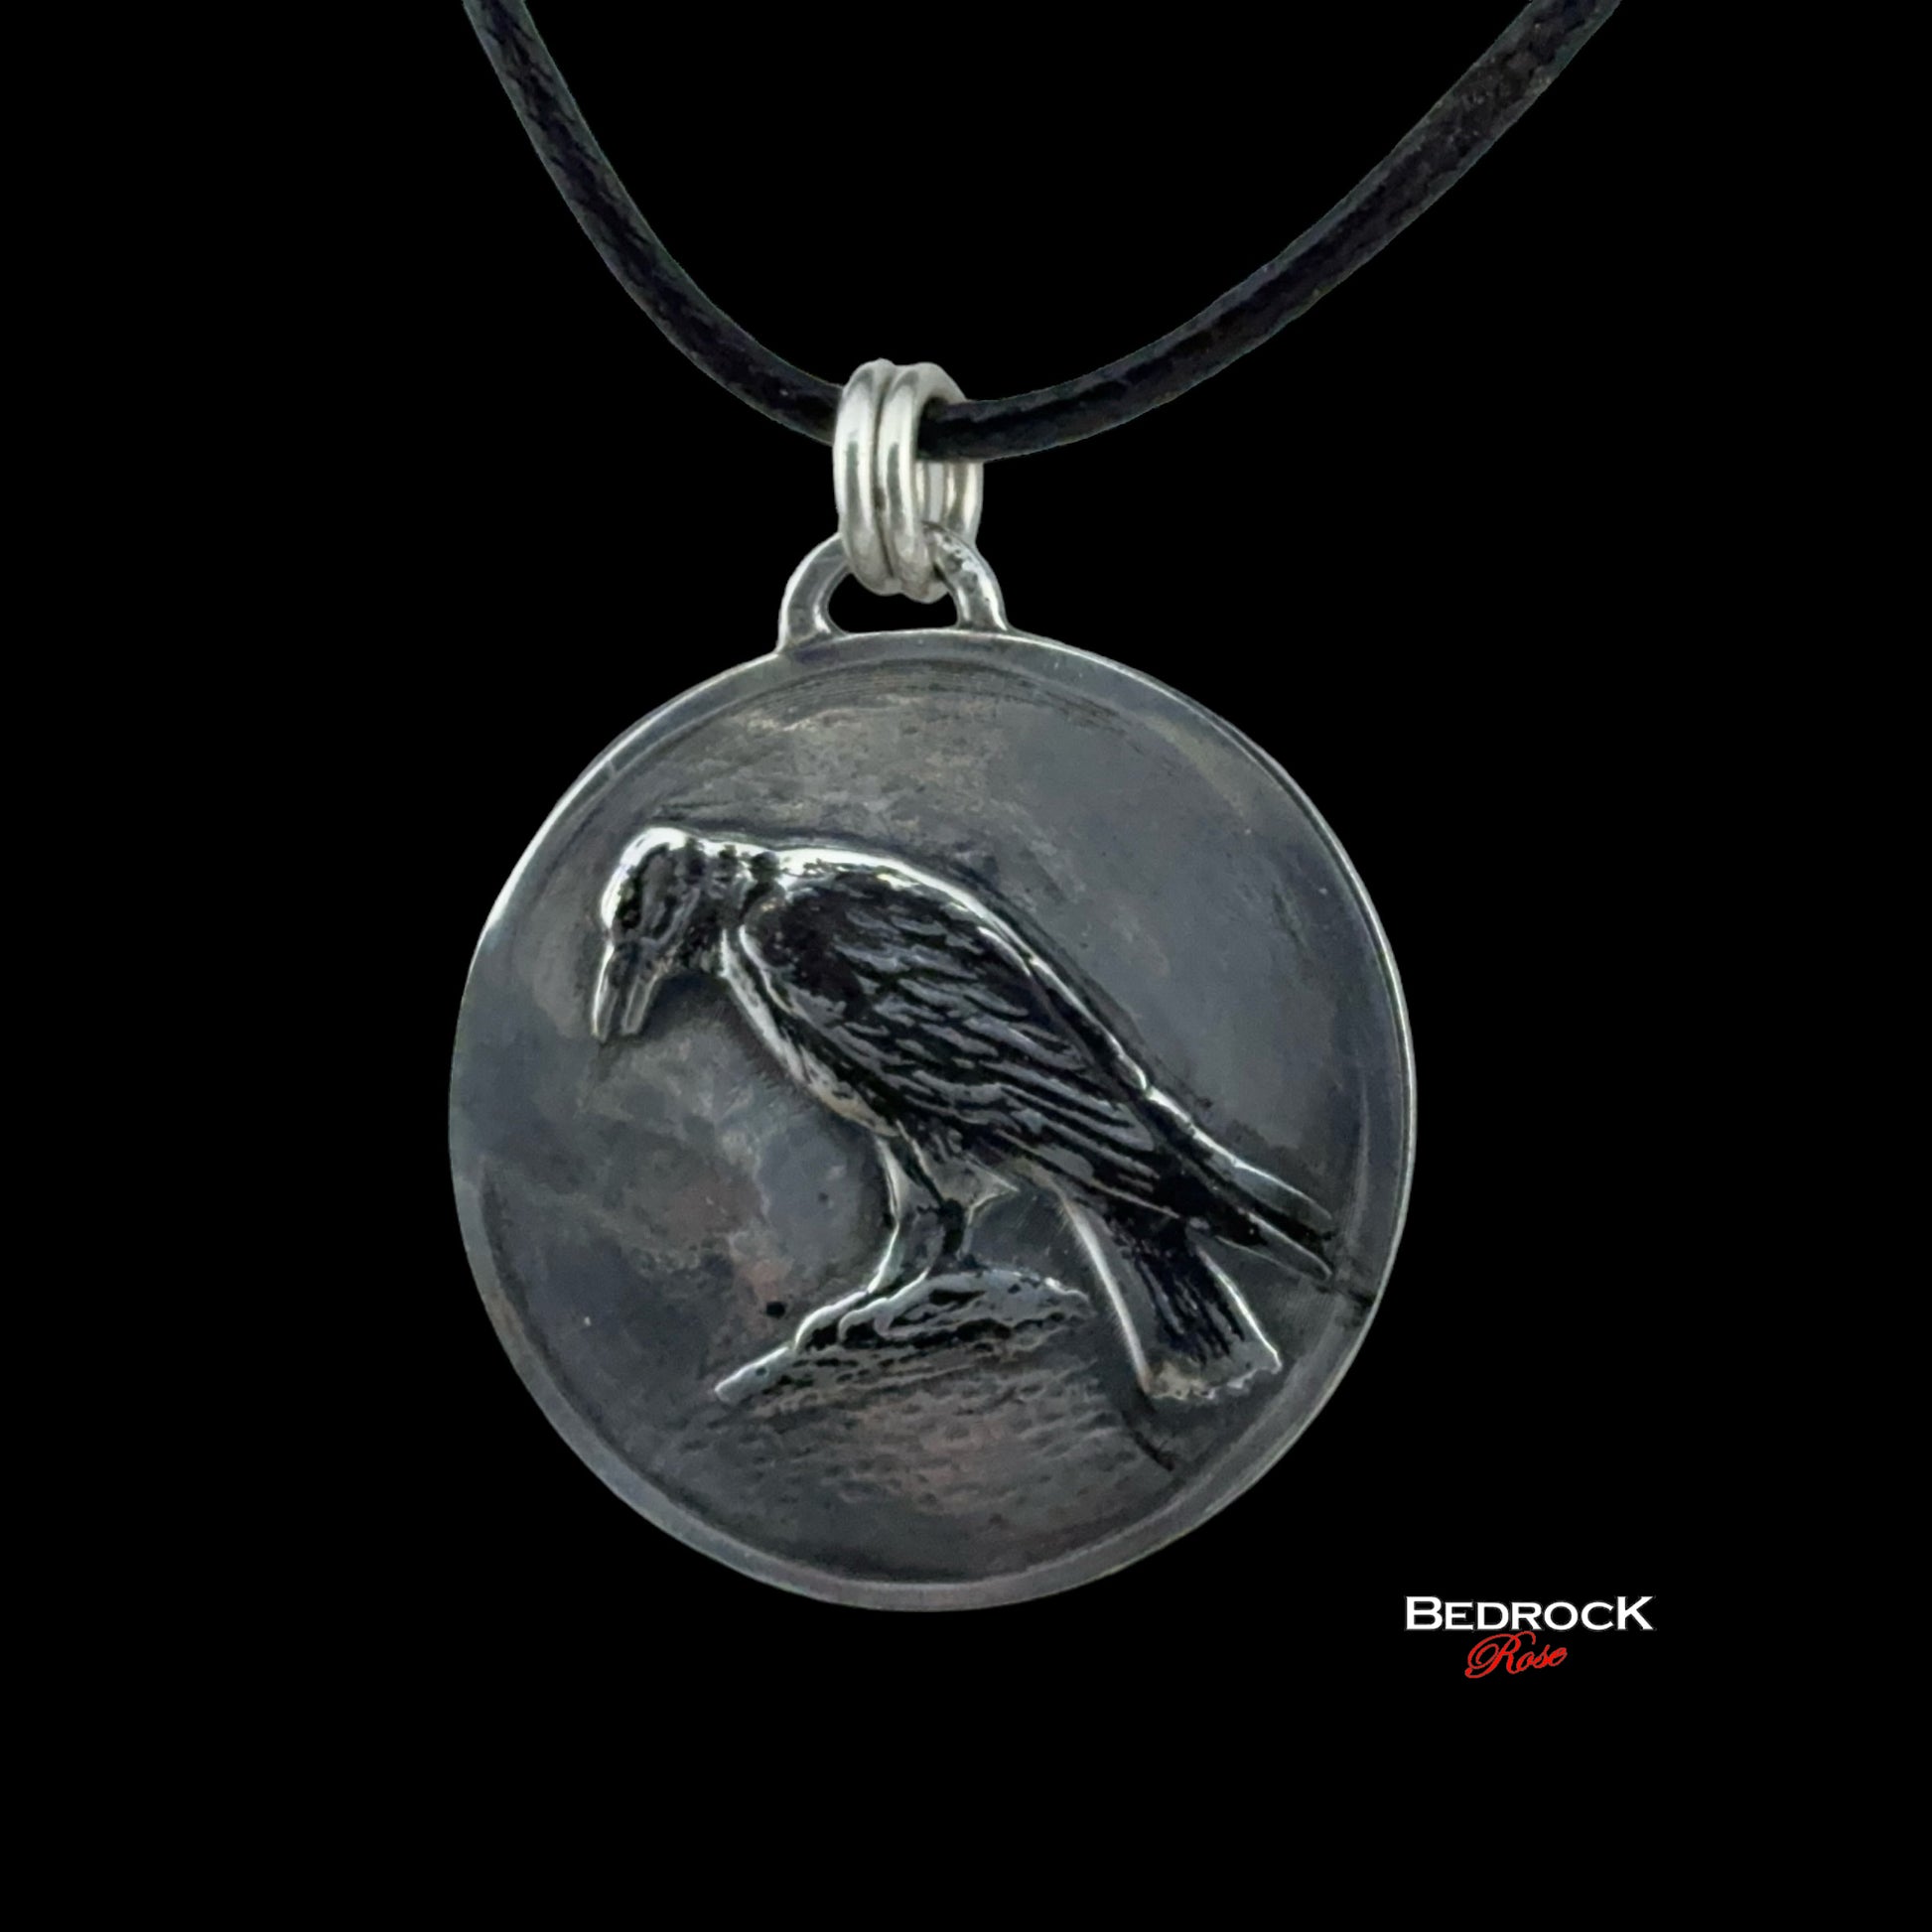 Close-up view of detailed crow design on the round silver pendant